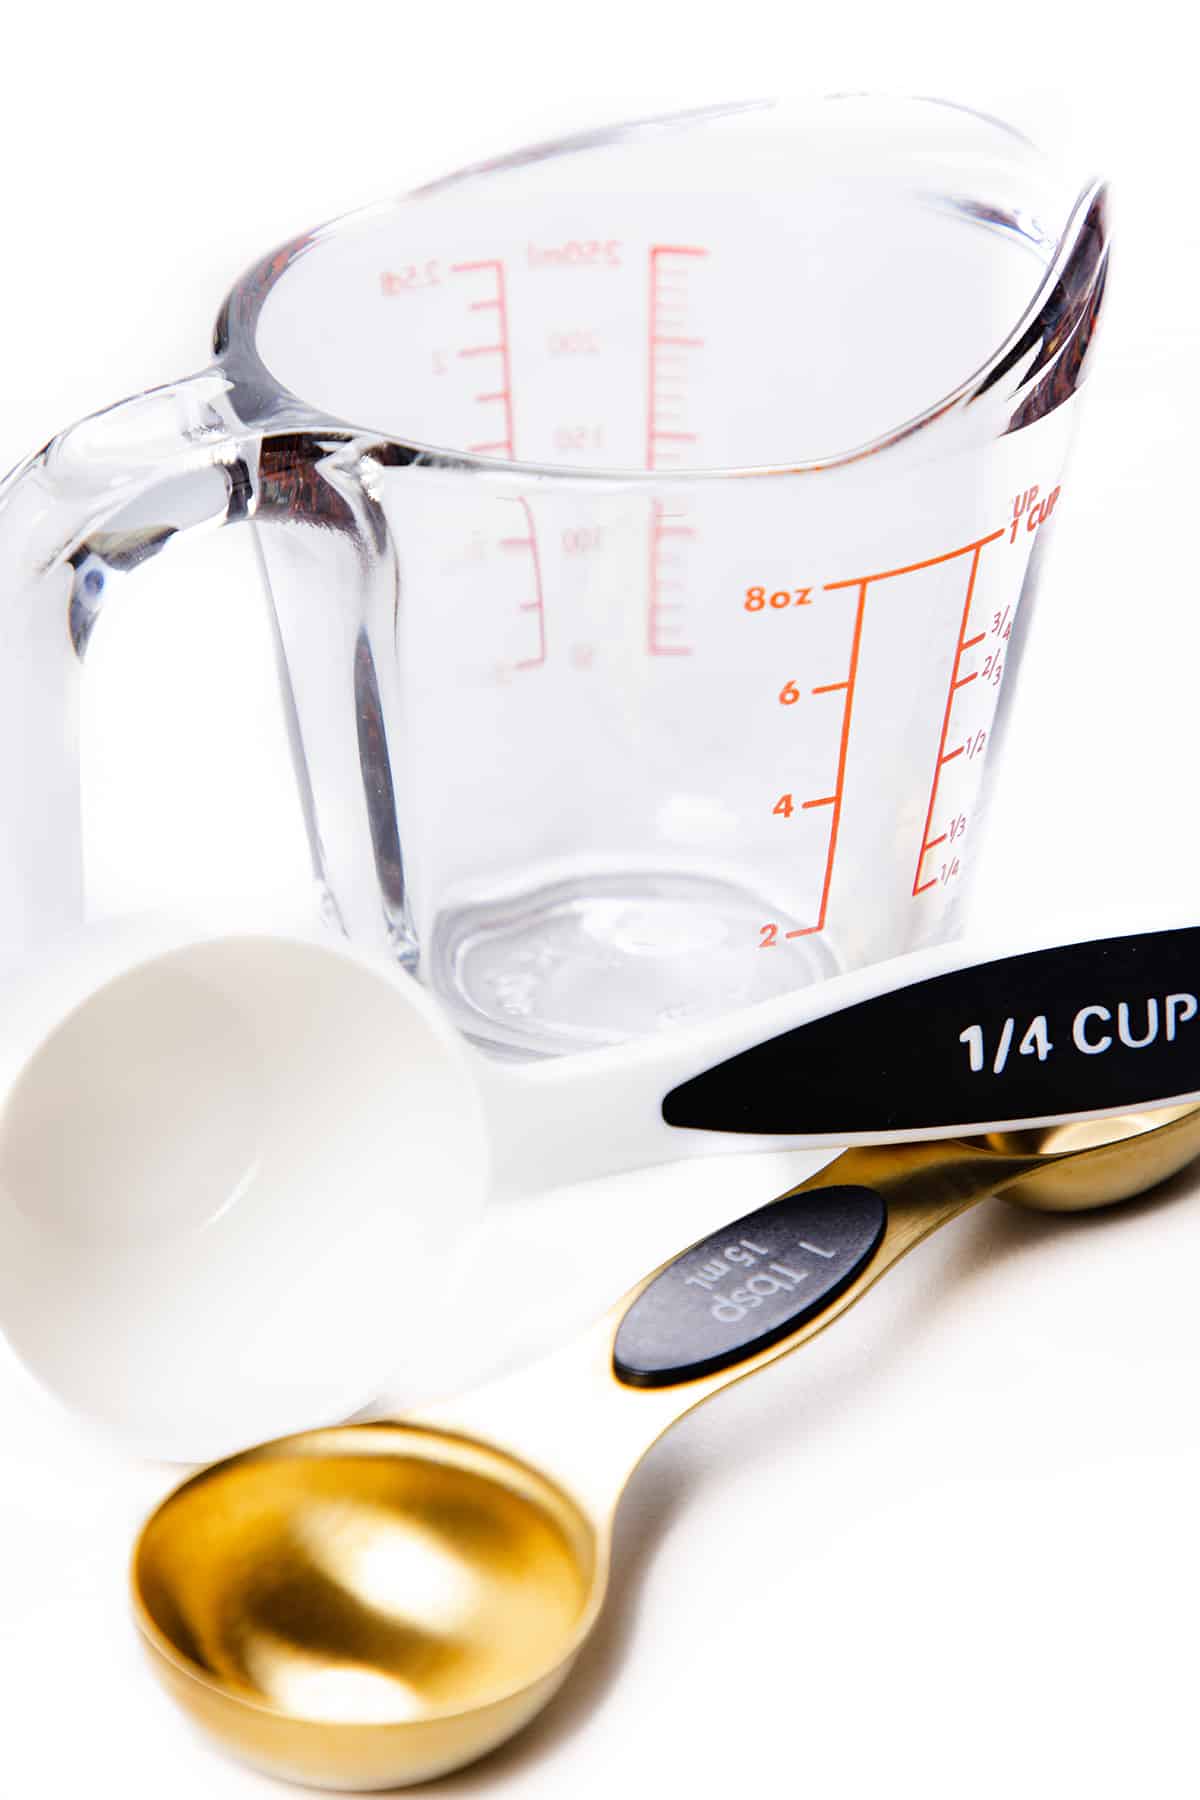 When to Use Dry and Liquid Measuring Cups to Ensure Baking Success